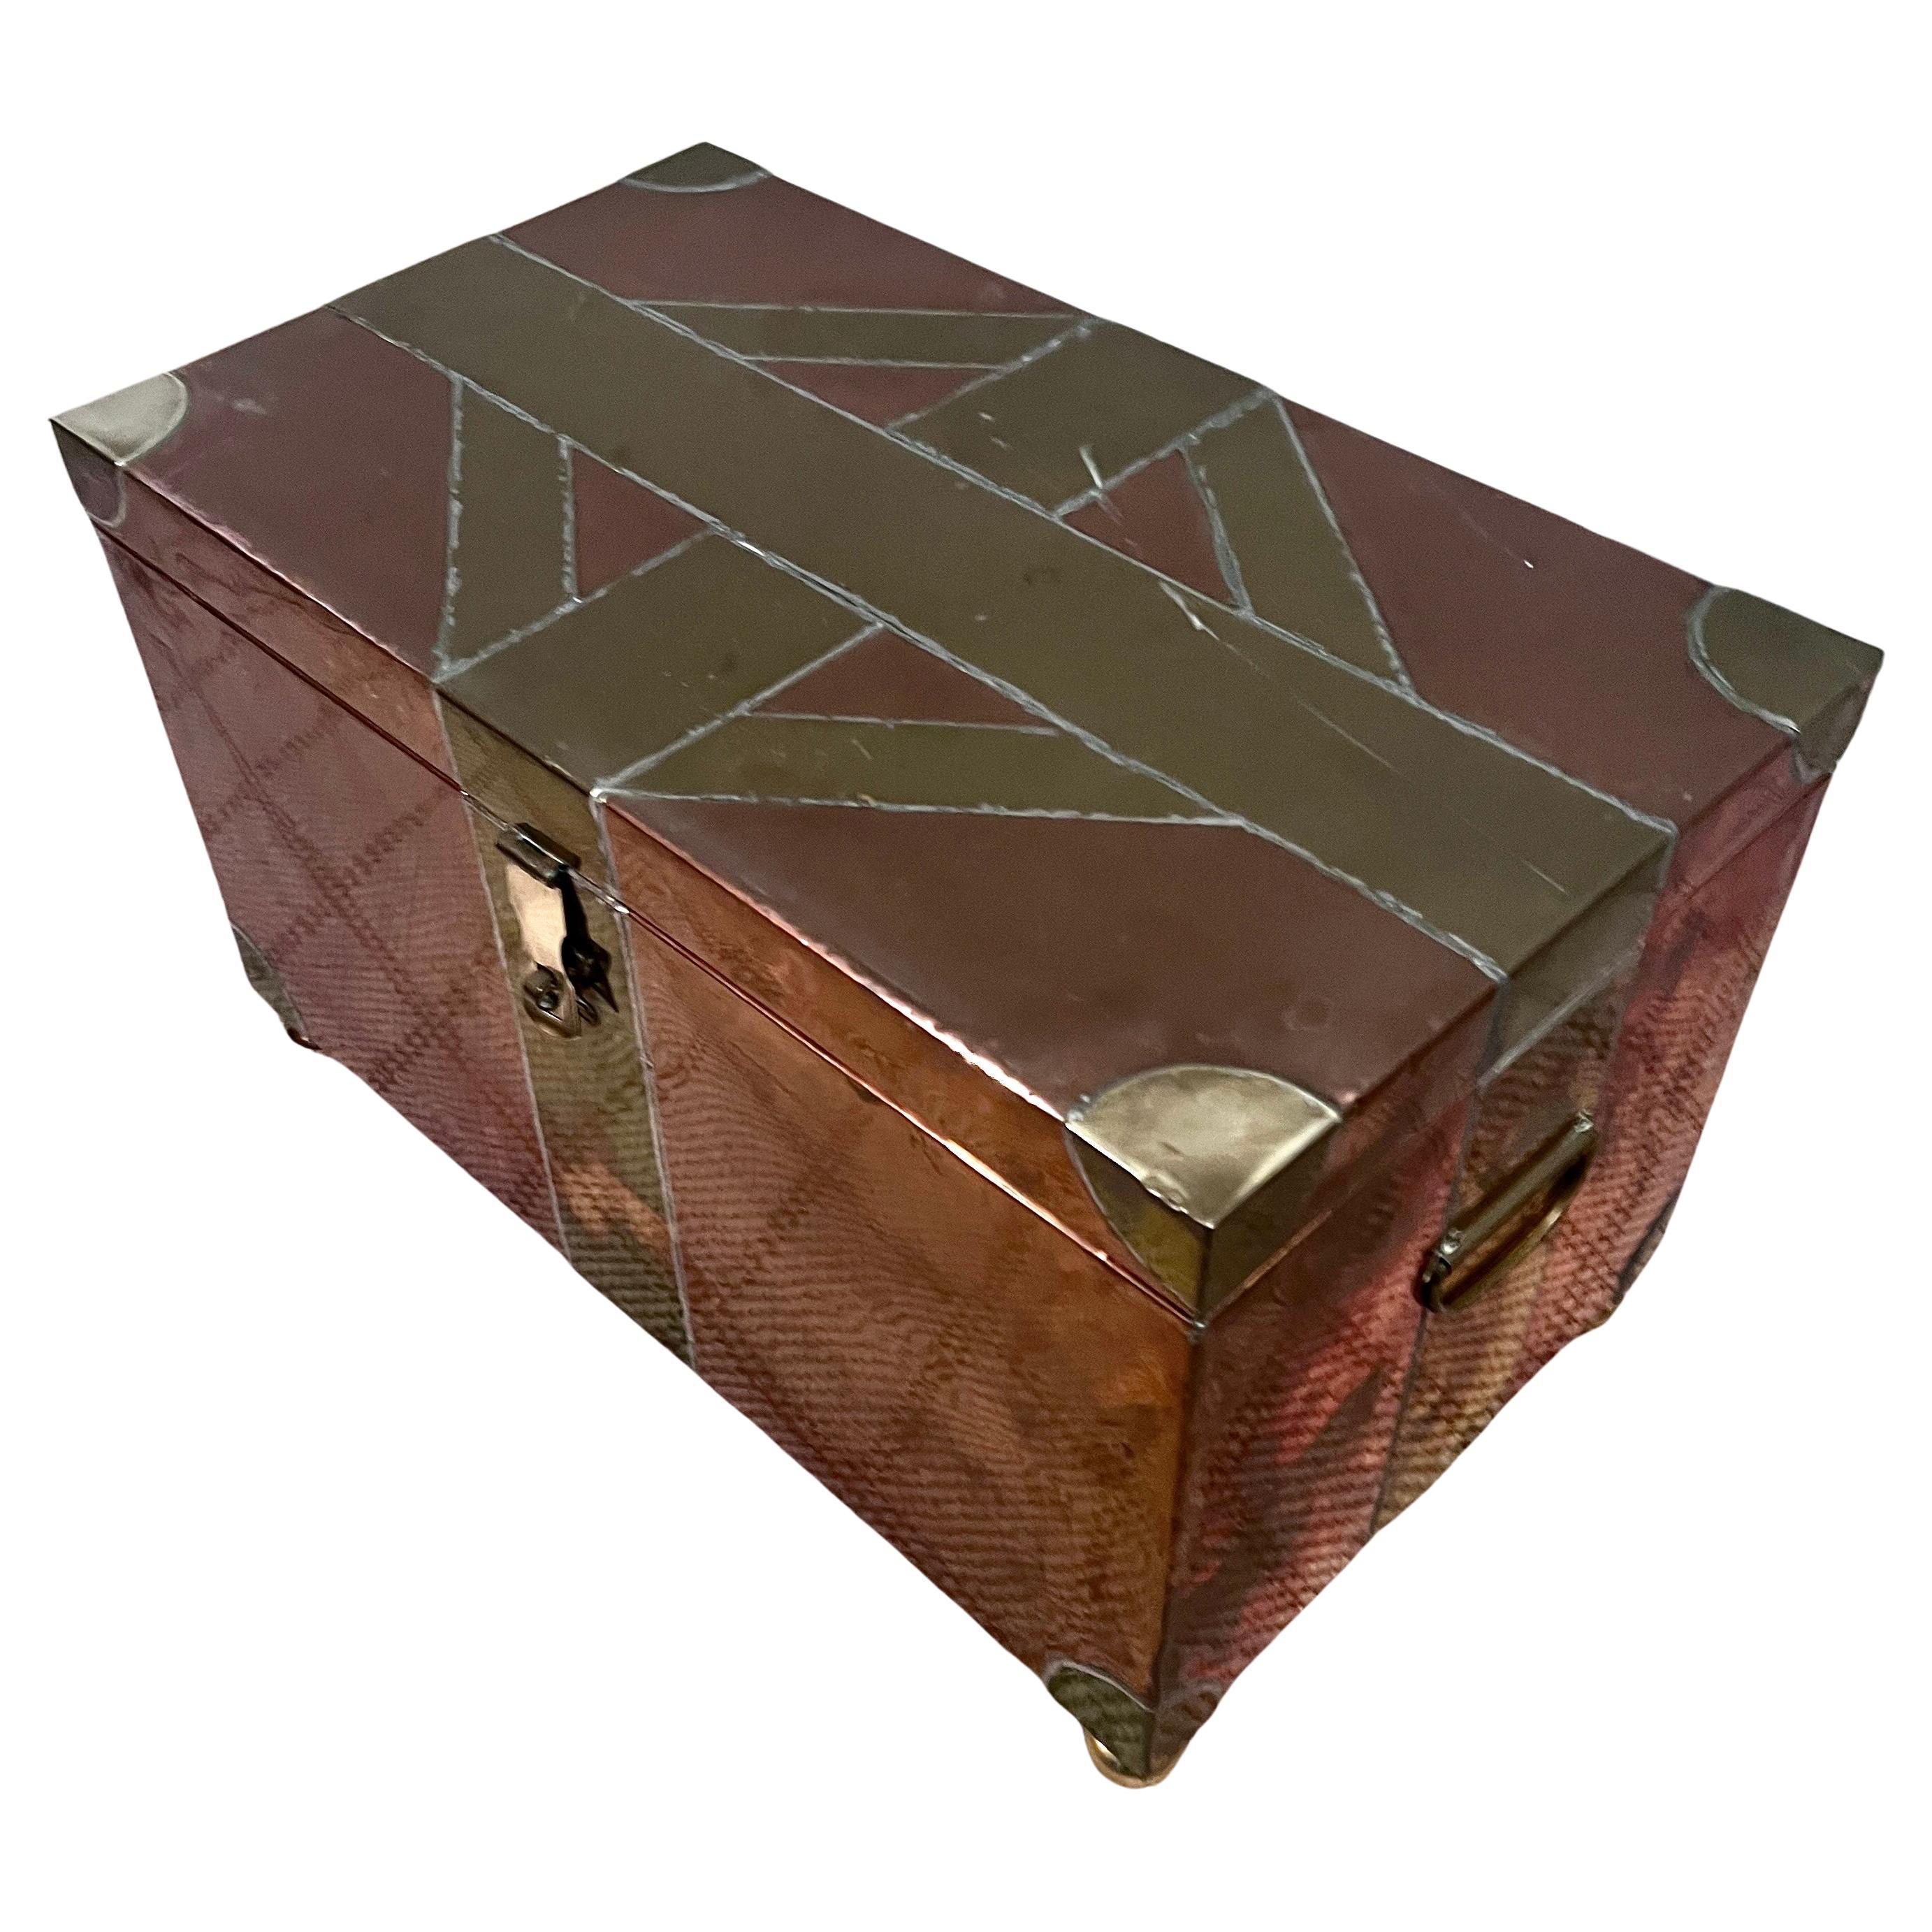 Muti-Metal Hinged box of Brass and Copper.  The piece is of the Brutalist Style and its hand Crafted qualities of welded or soldered pieces of Metal to form a geometric pattern with Brass Corners and polished brass bun feet.

A compliment to many